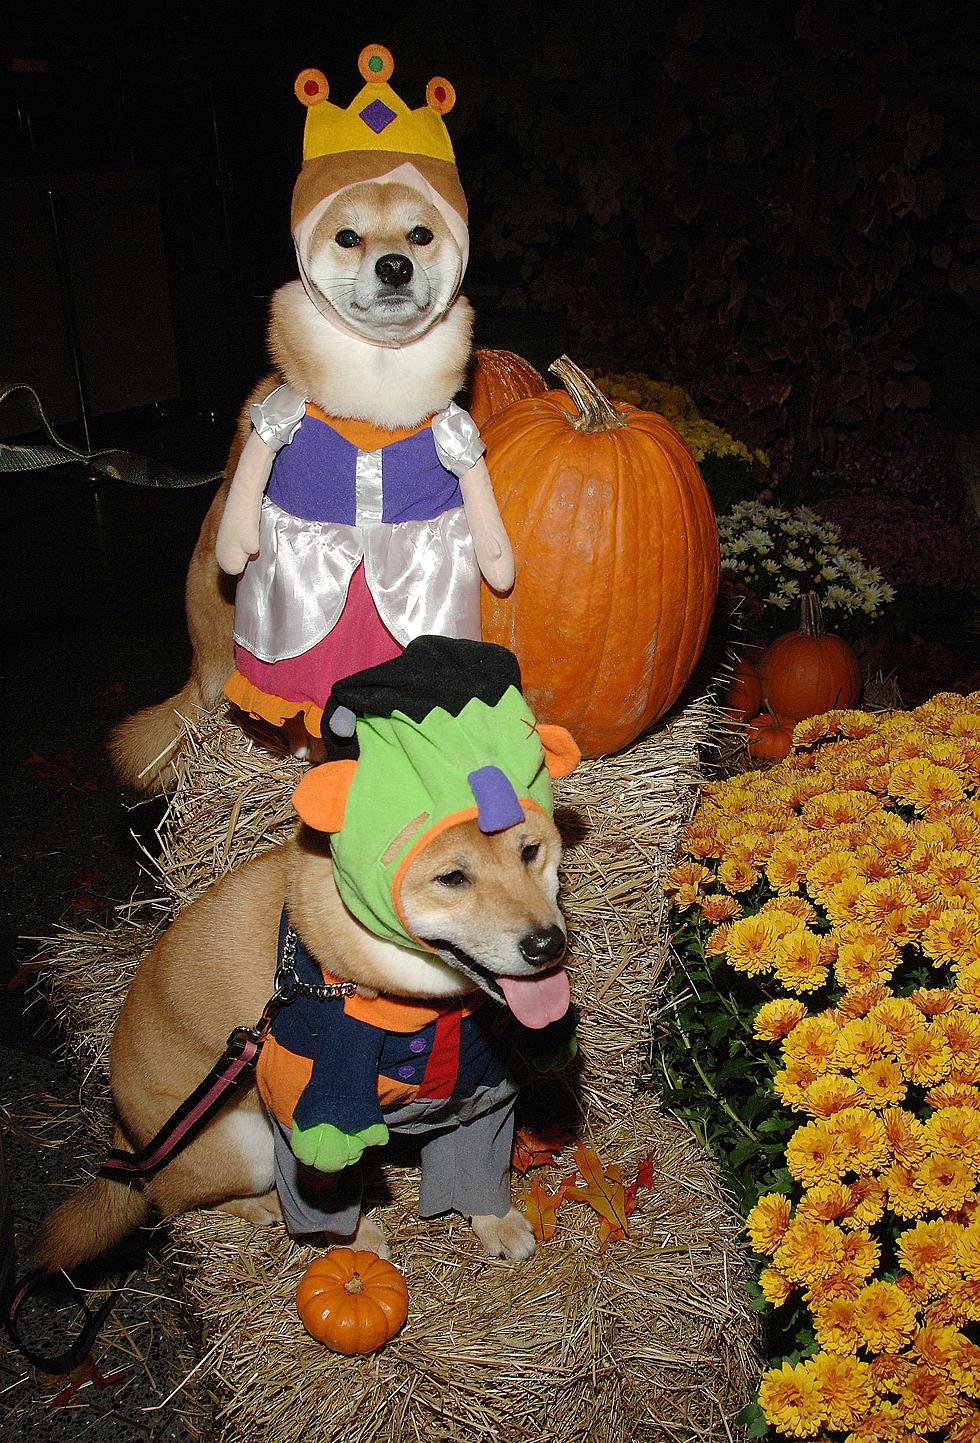 Dressing Up Your Pet for Halloween Is Not a Great Idea